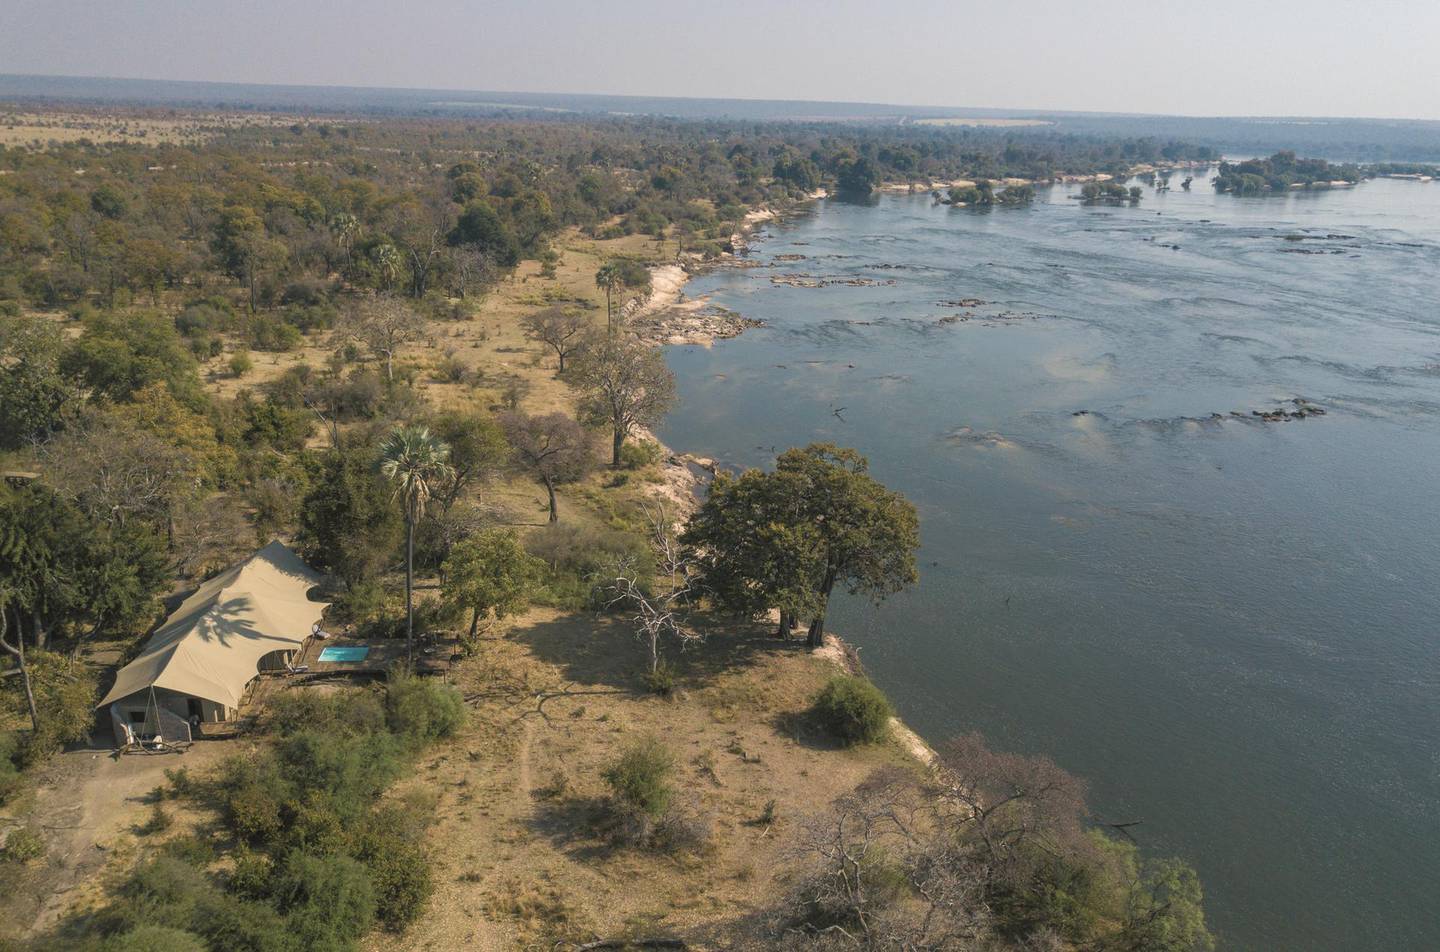 The lodge is located 20km upstream from Victoria Falls. Courtesy Andrew Howard Photo